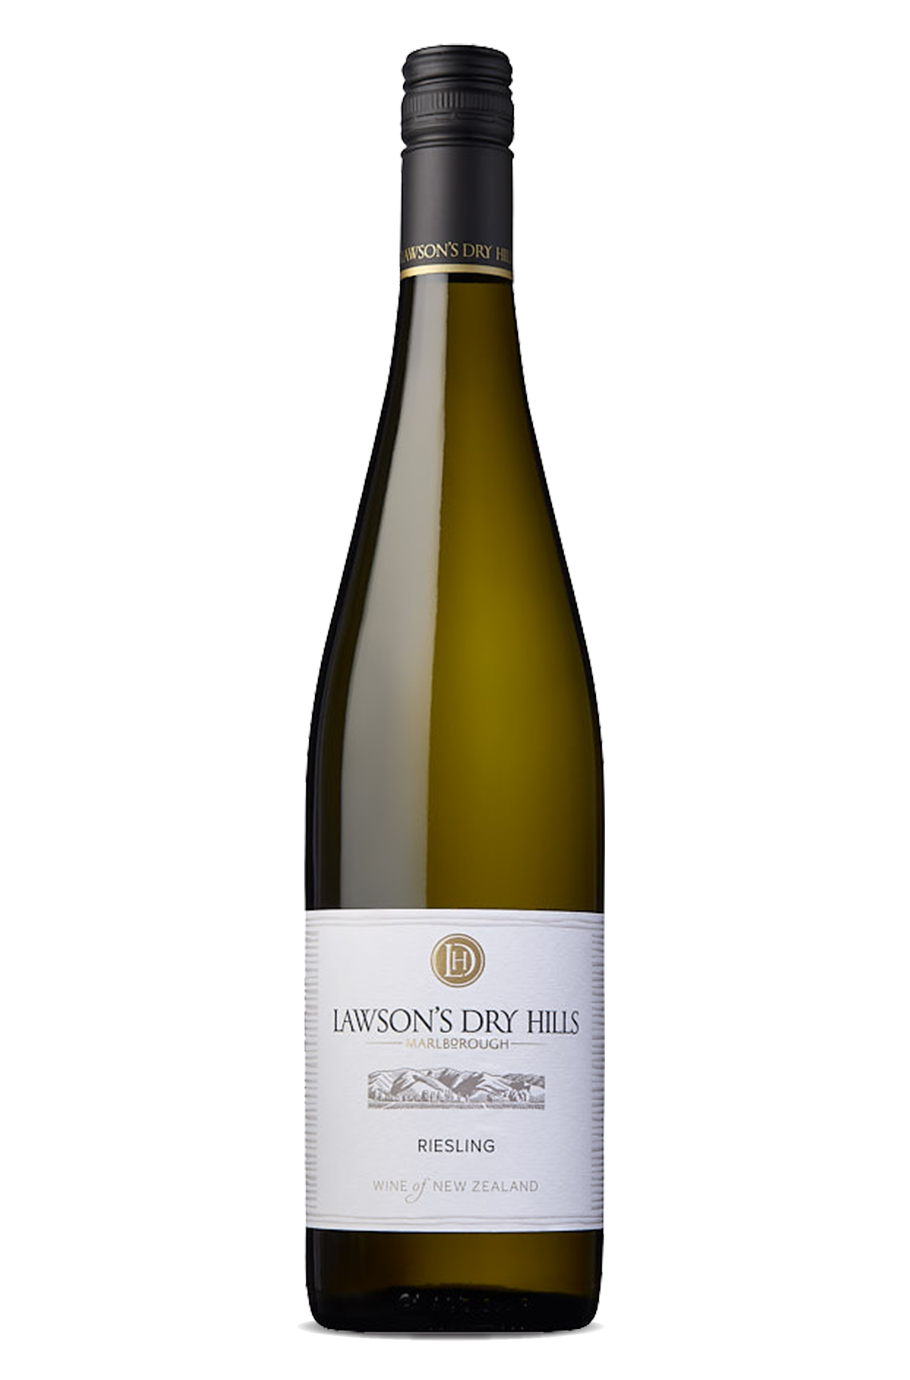 Lawson's Dry Hills Estate Riesling 2019